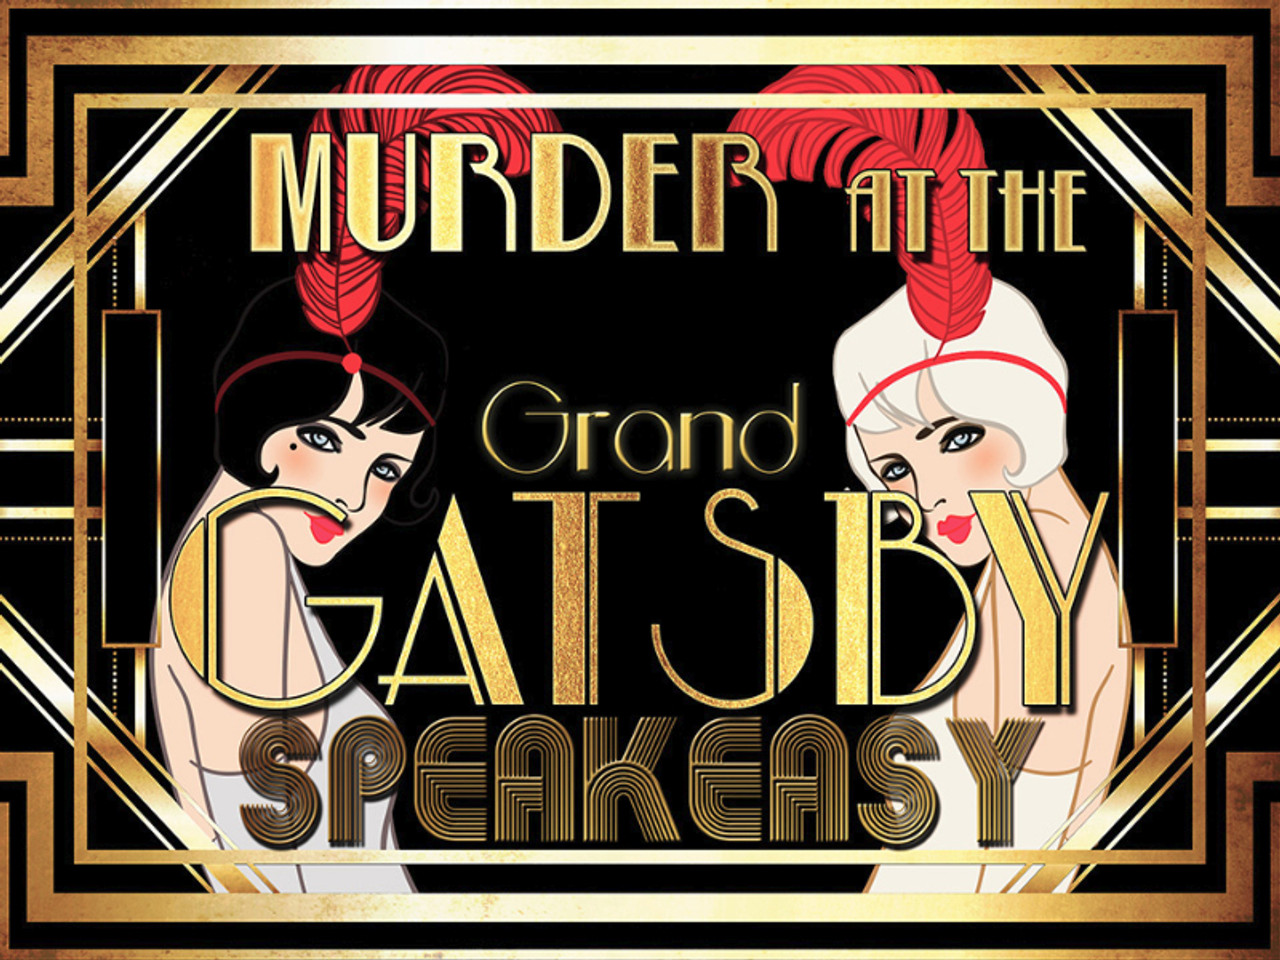 1920s Party Décor & Great Gatsby Party Ideas  1920s party, Mystery dinner  party, Speakeasy party